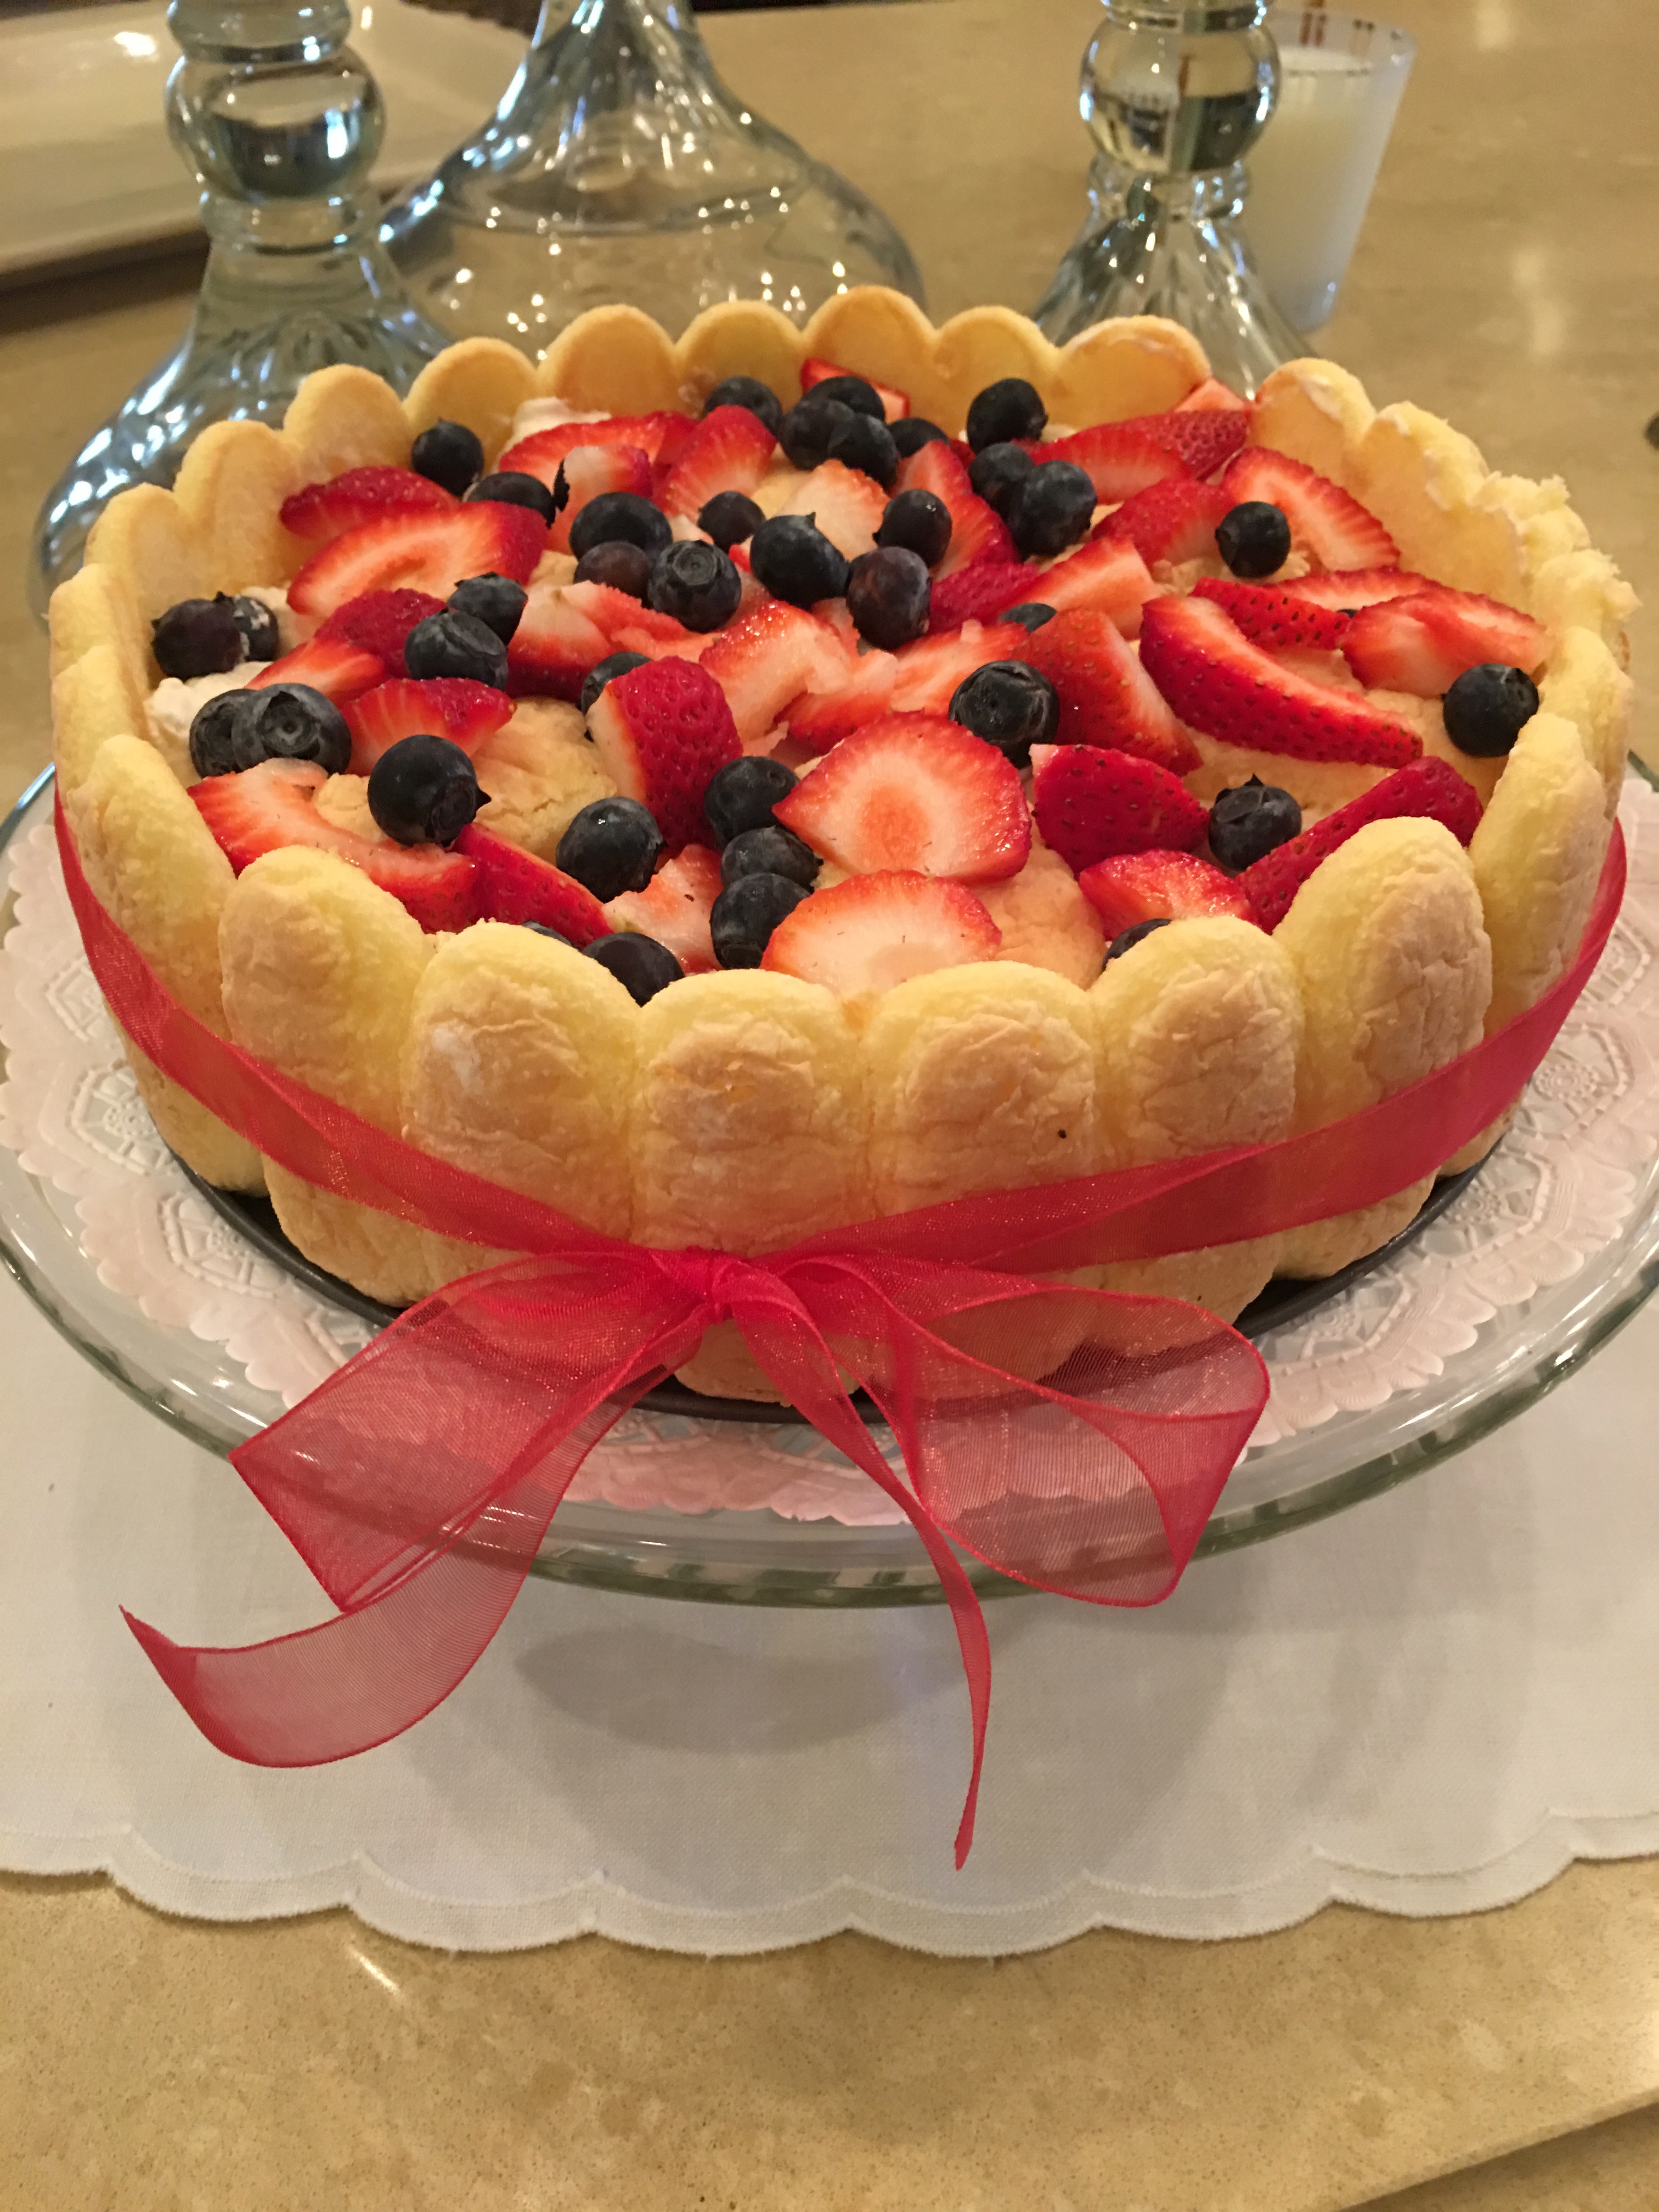 A Fruity Dessert for a Special Day | Simply the Best from Barbara McKay